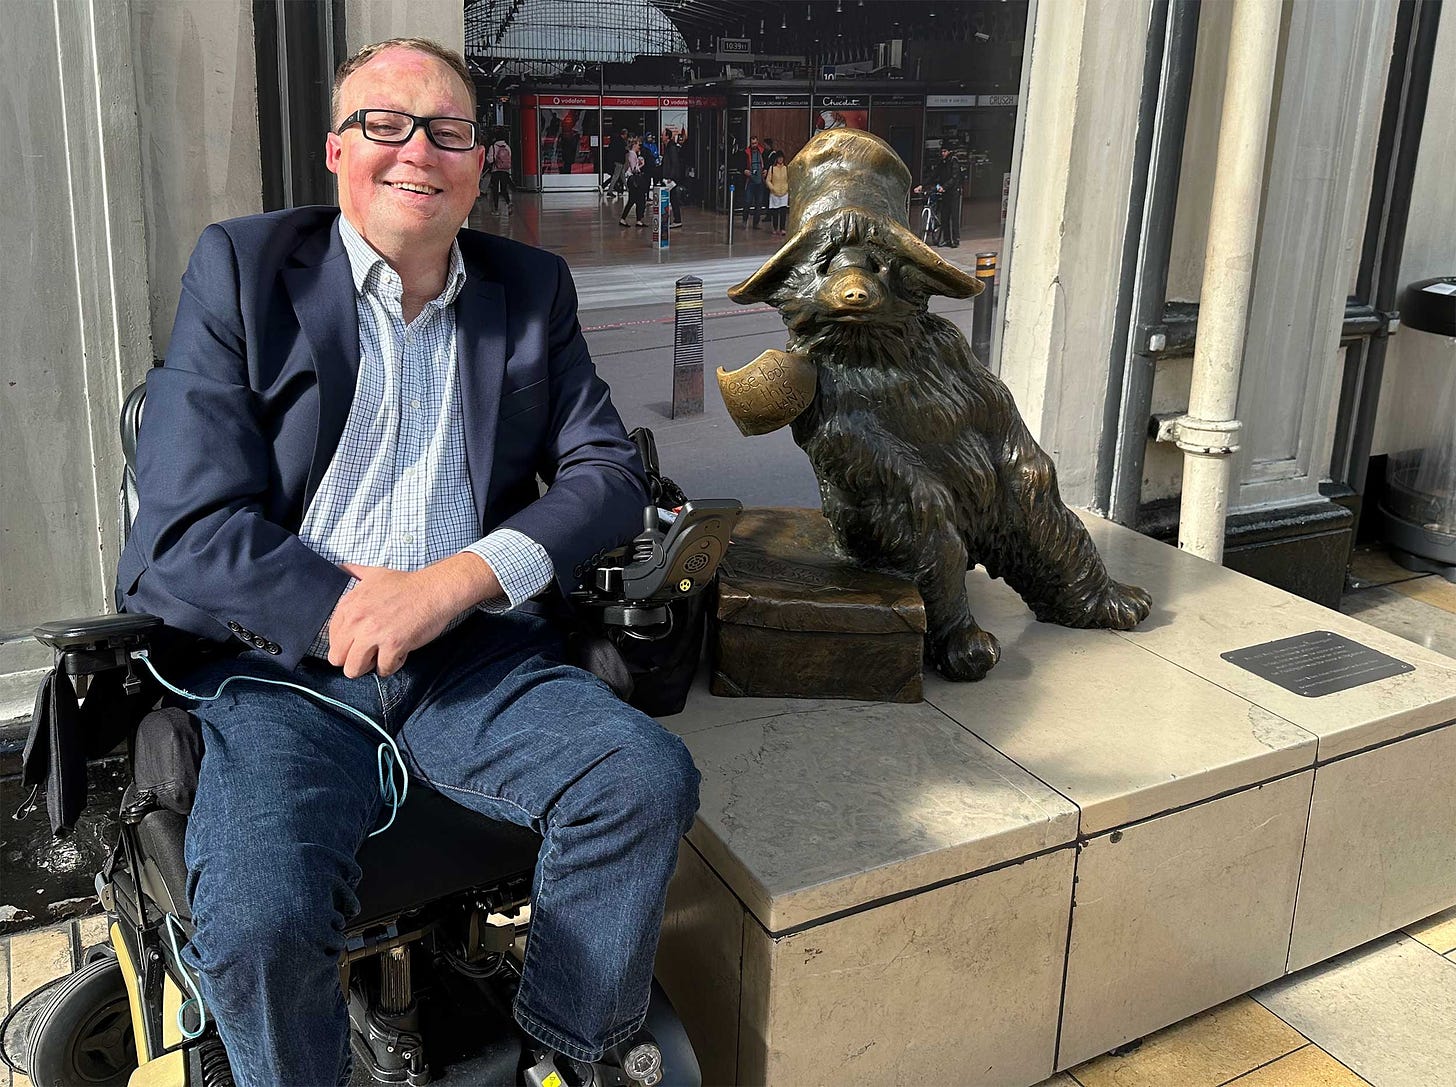 John seated in his wheelchair next to a statue of the Paddington Bear.